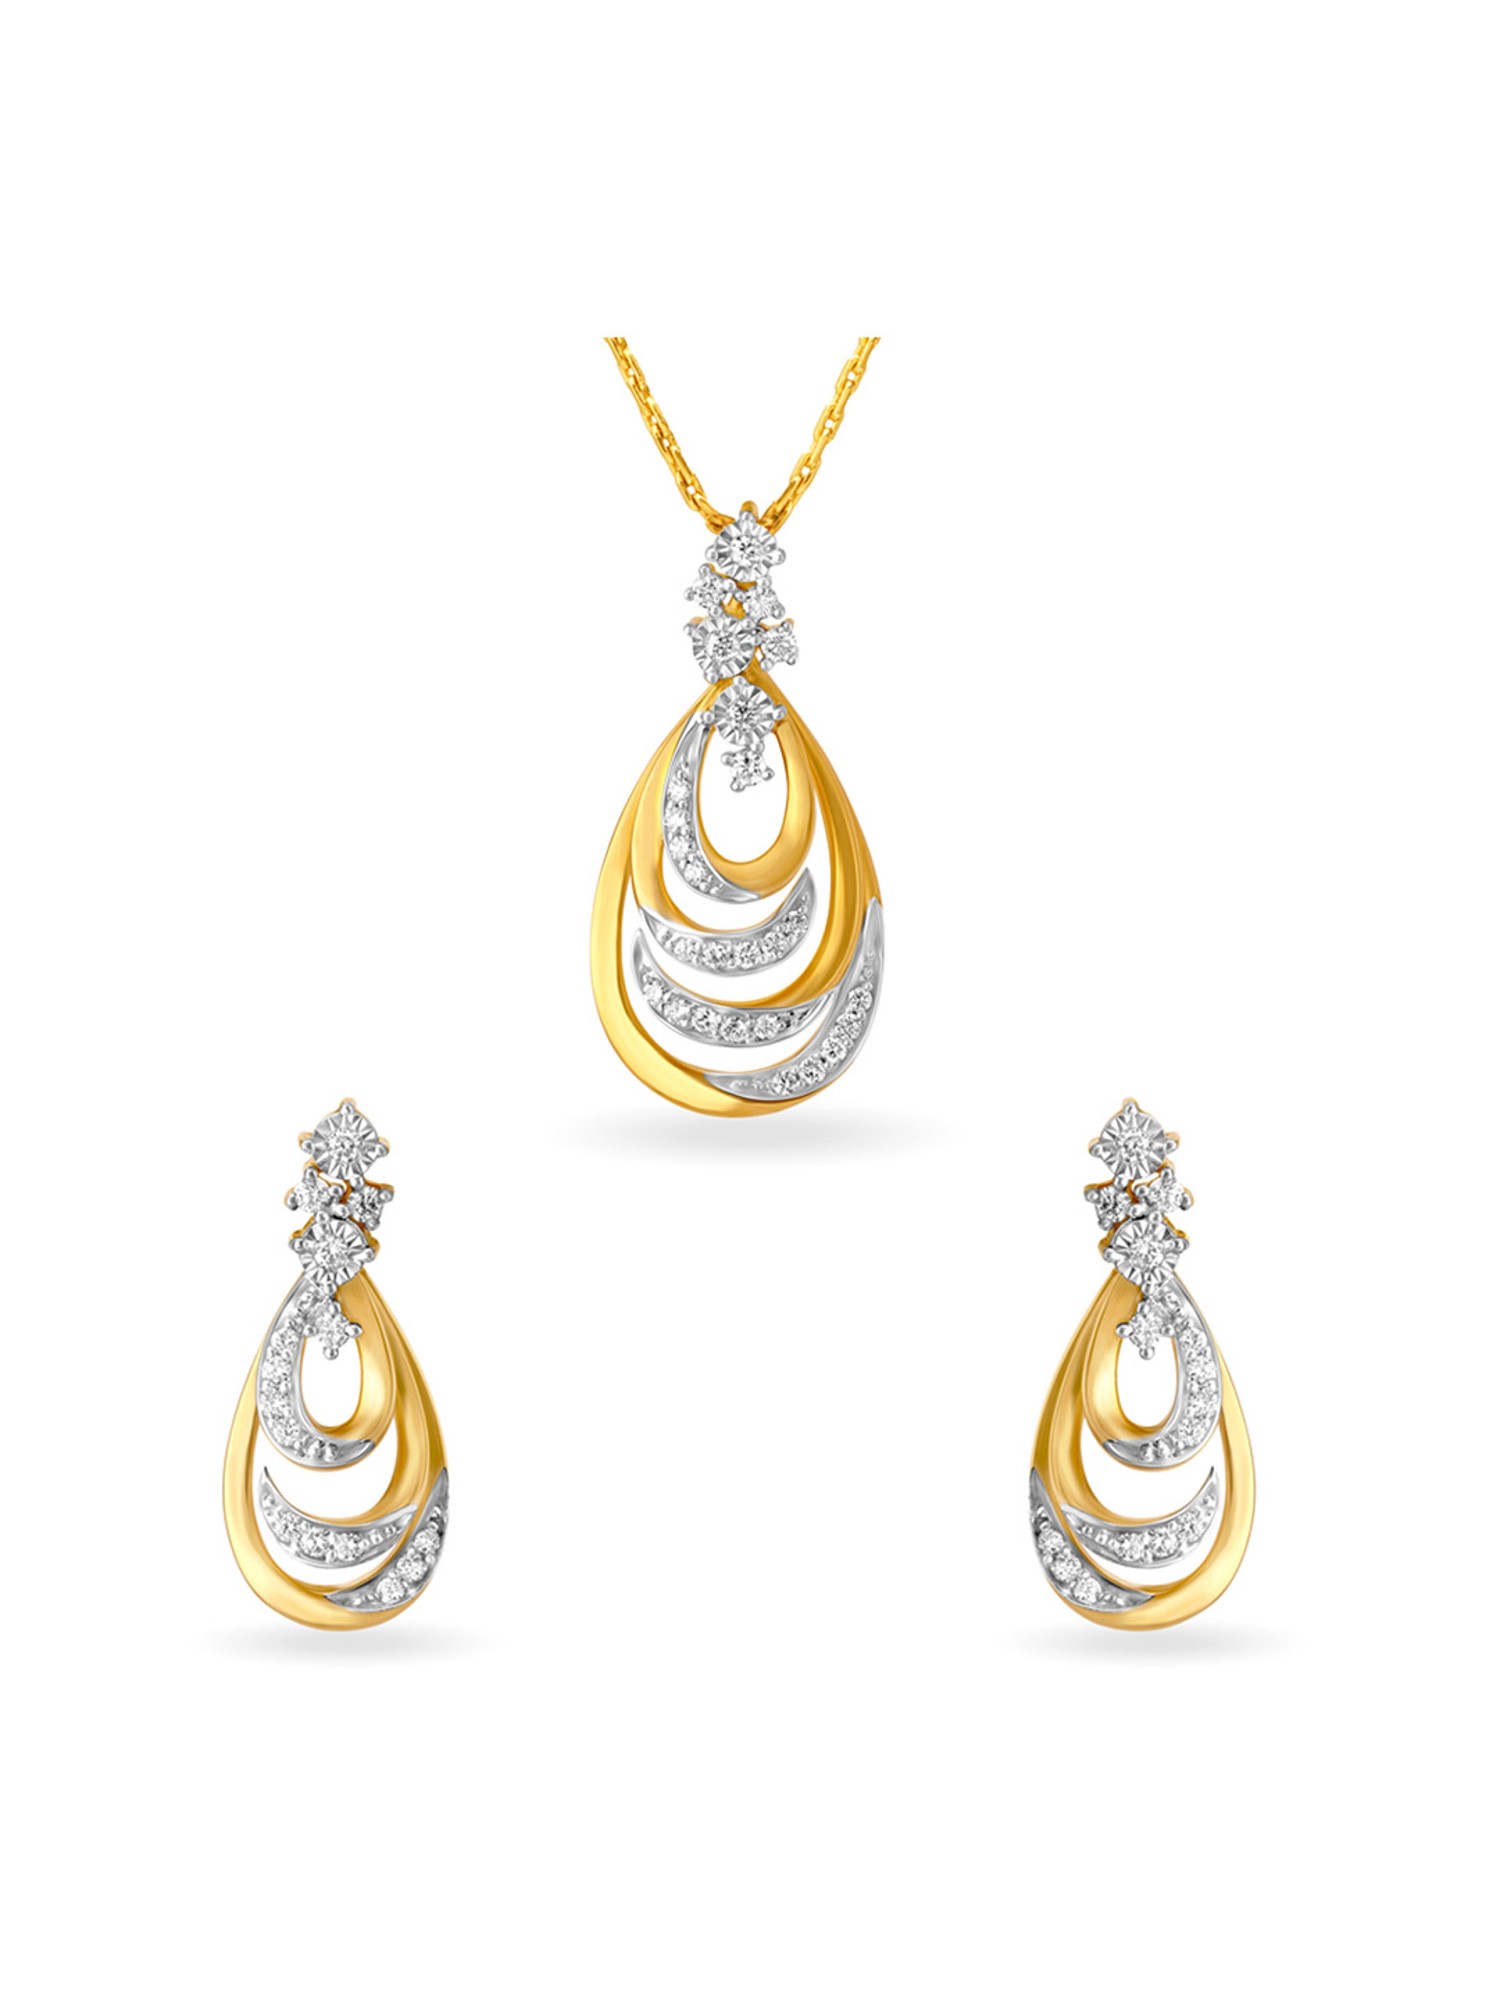 Sparkling Finesse Diamond Pendant and Earrings Set